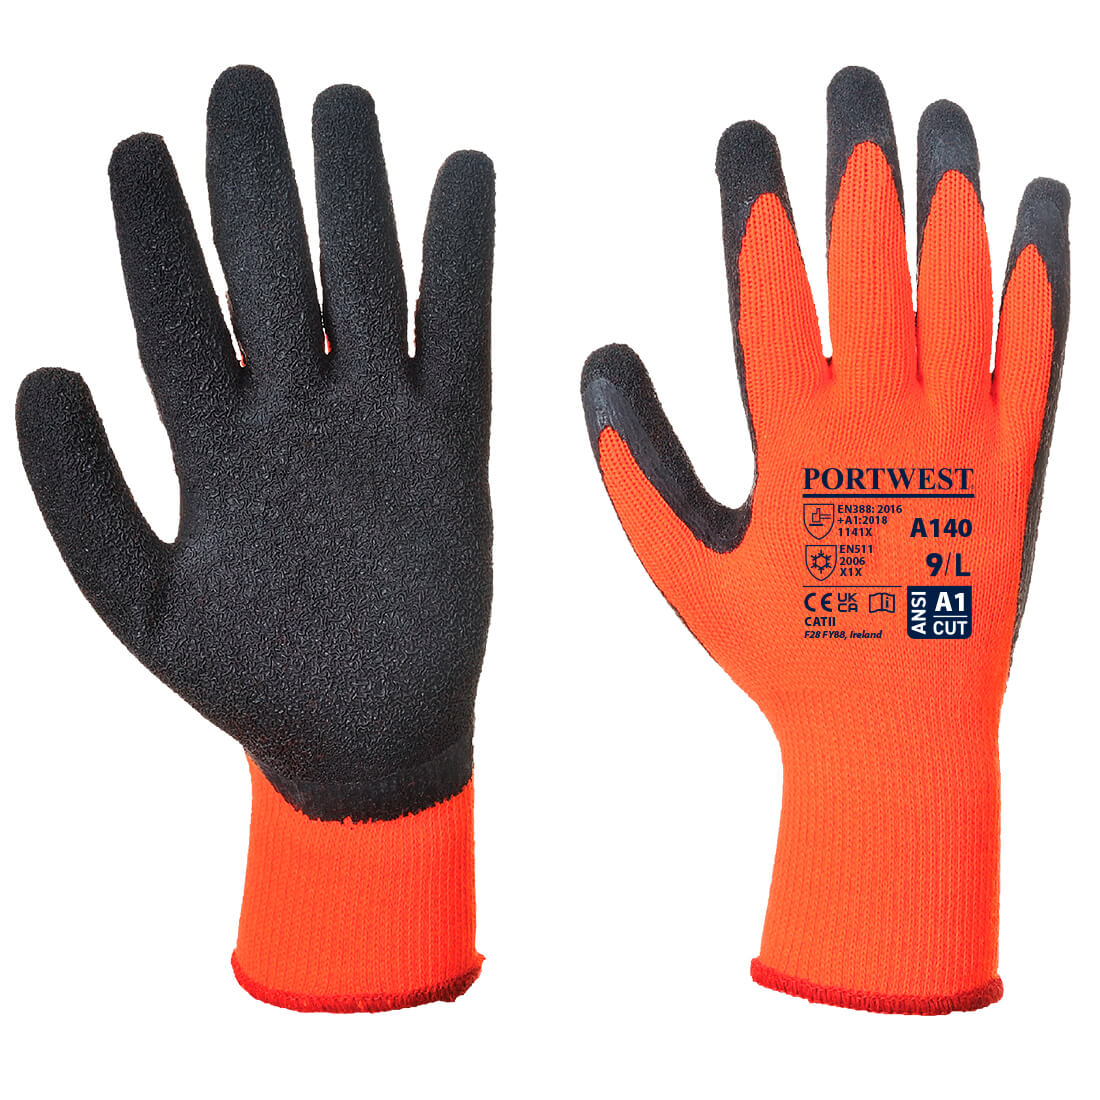 Thermo Grip Handschuh